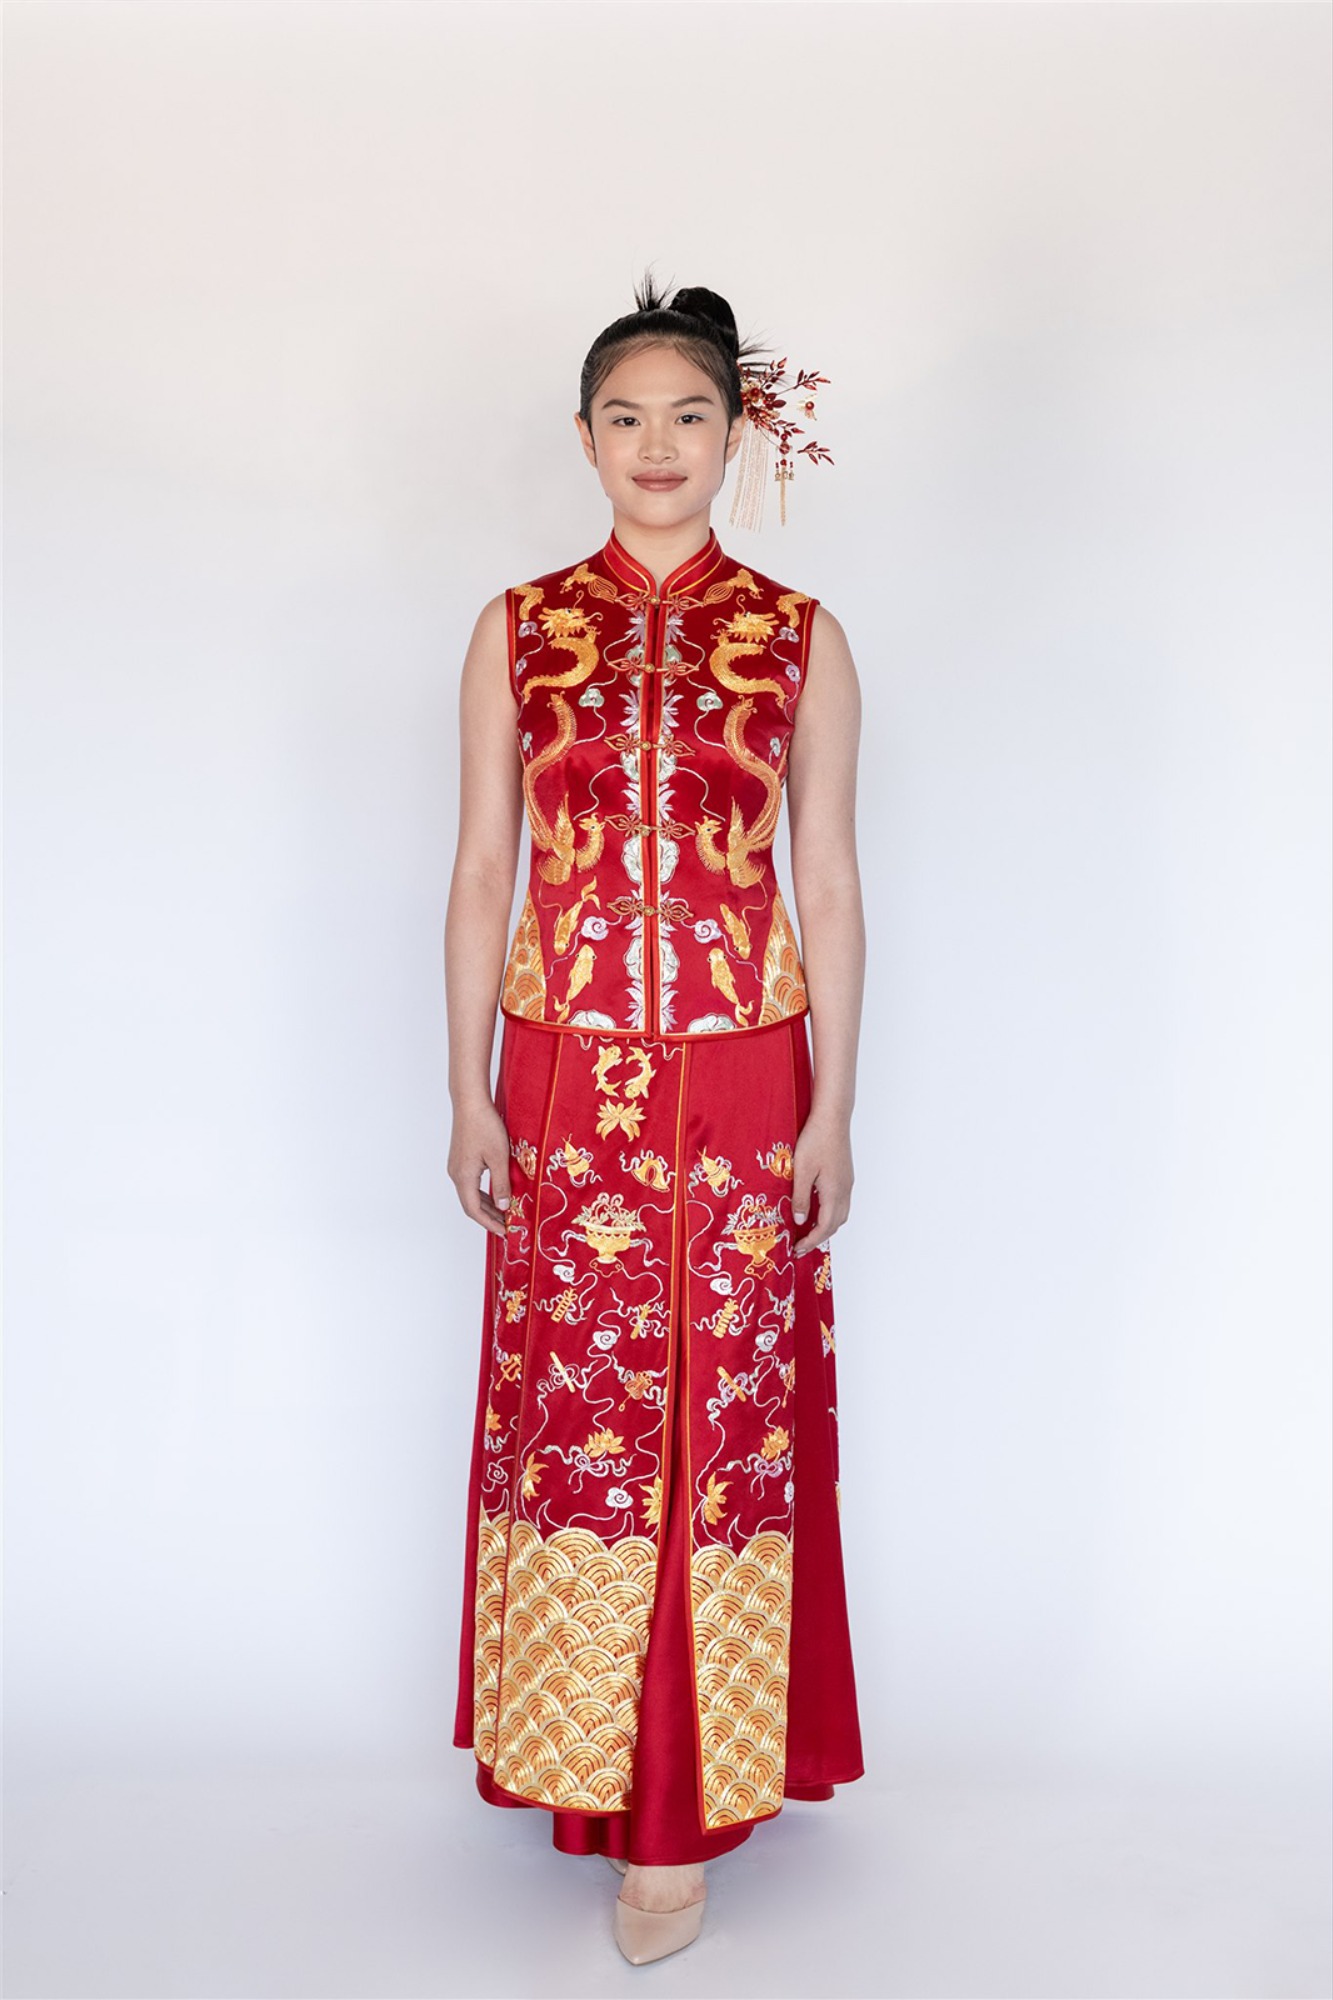 custom Chinese wedding attire designed by Jinza Couture